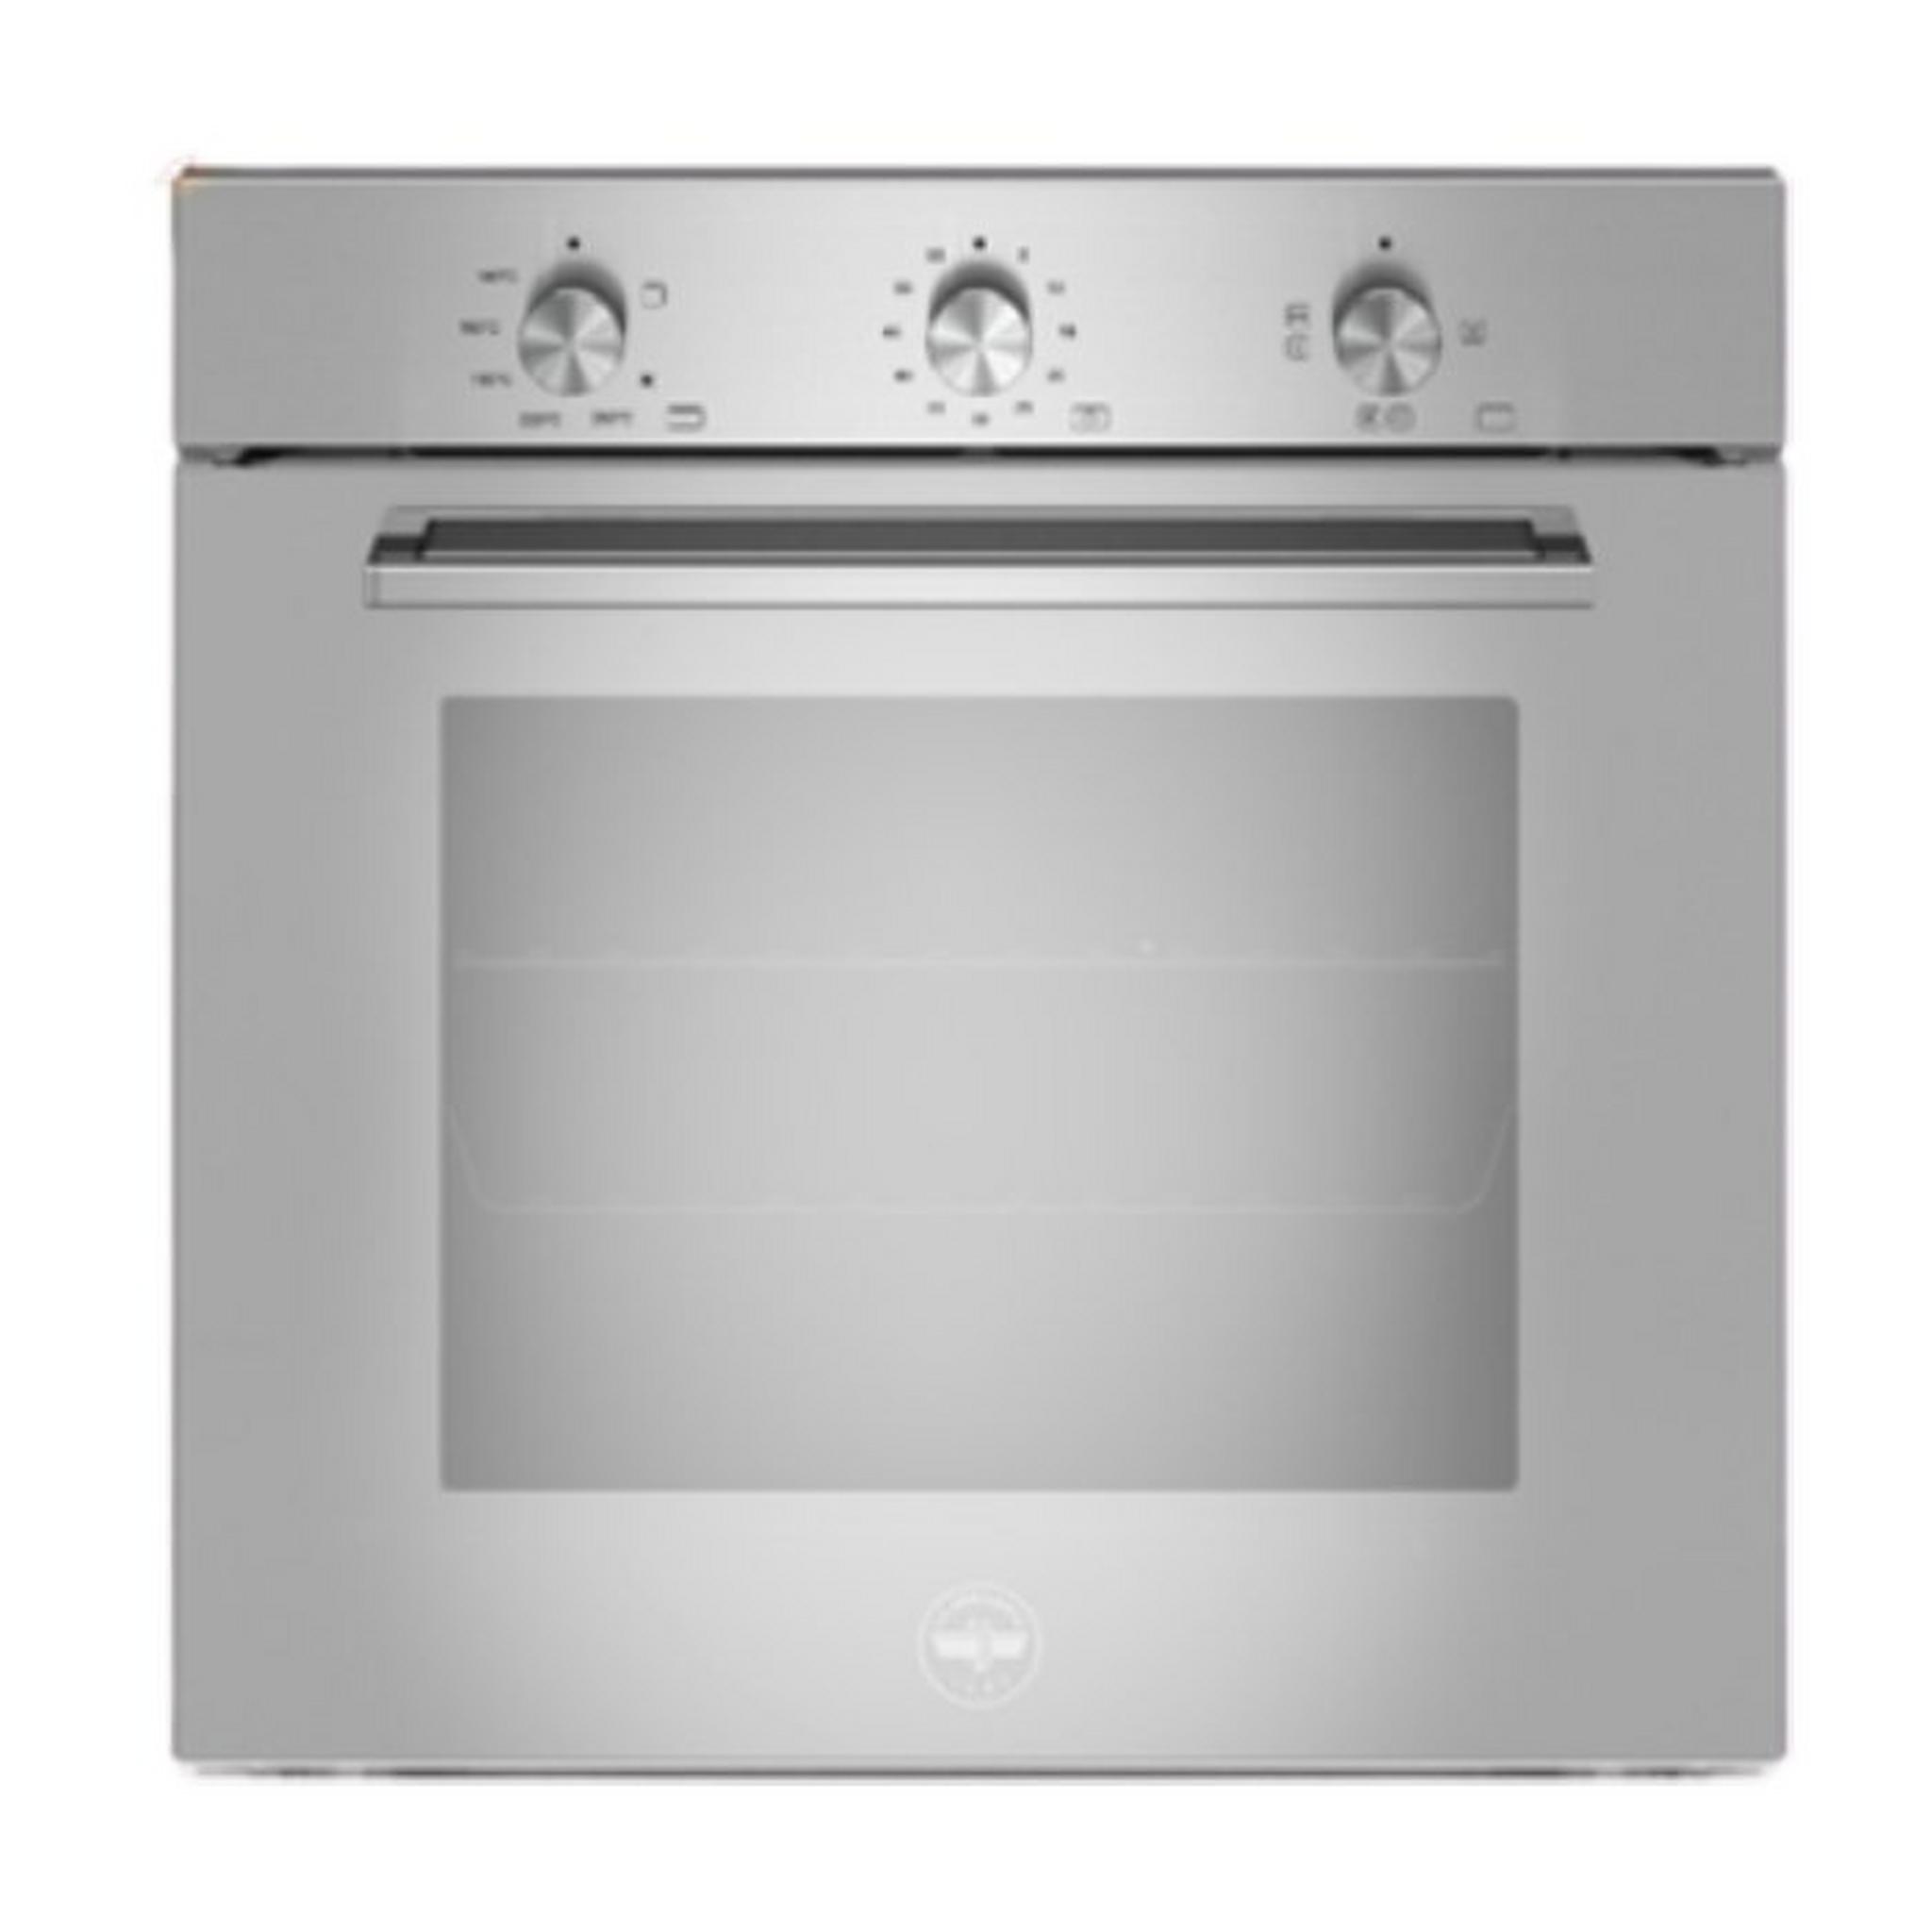 Lagermania 60 CM Built In Gas Oven - Stainless Steel(F605LAGGKX)